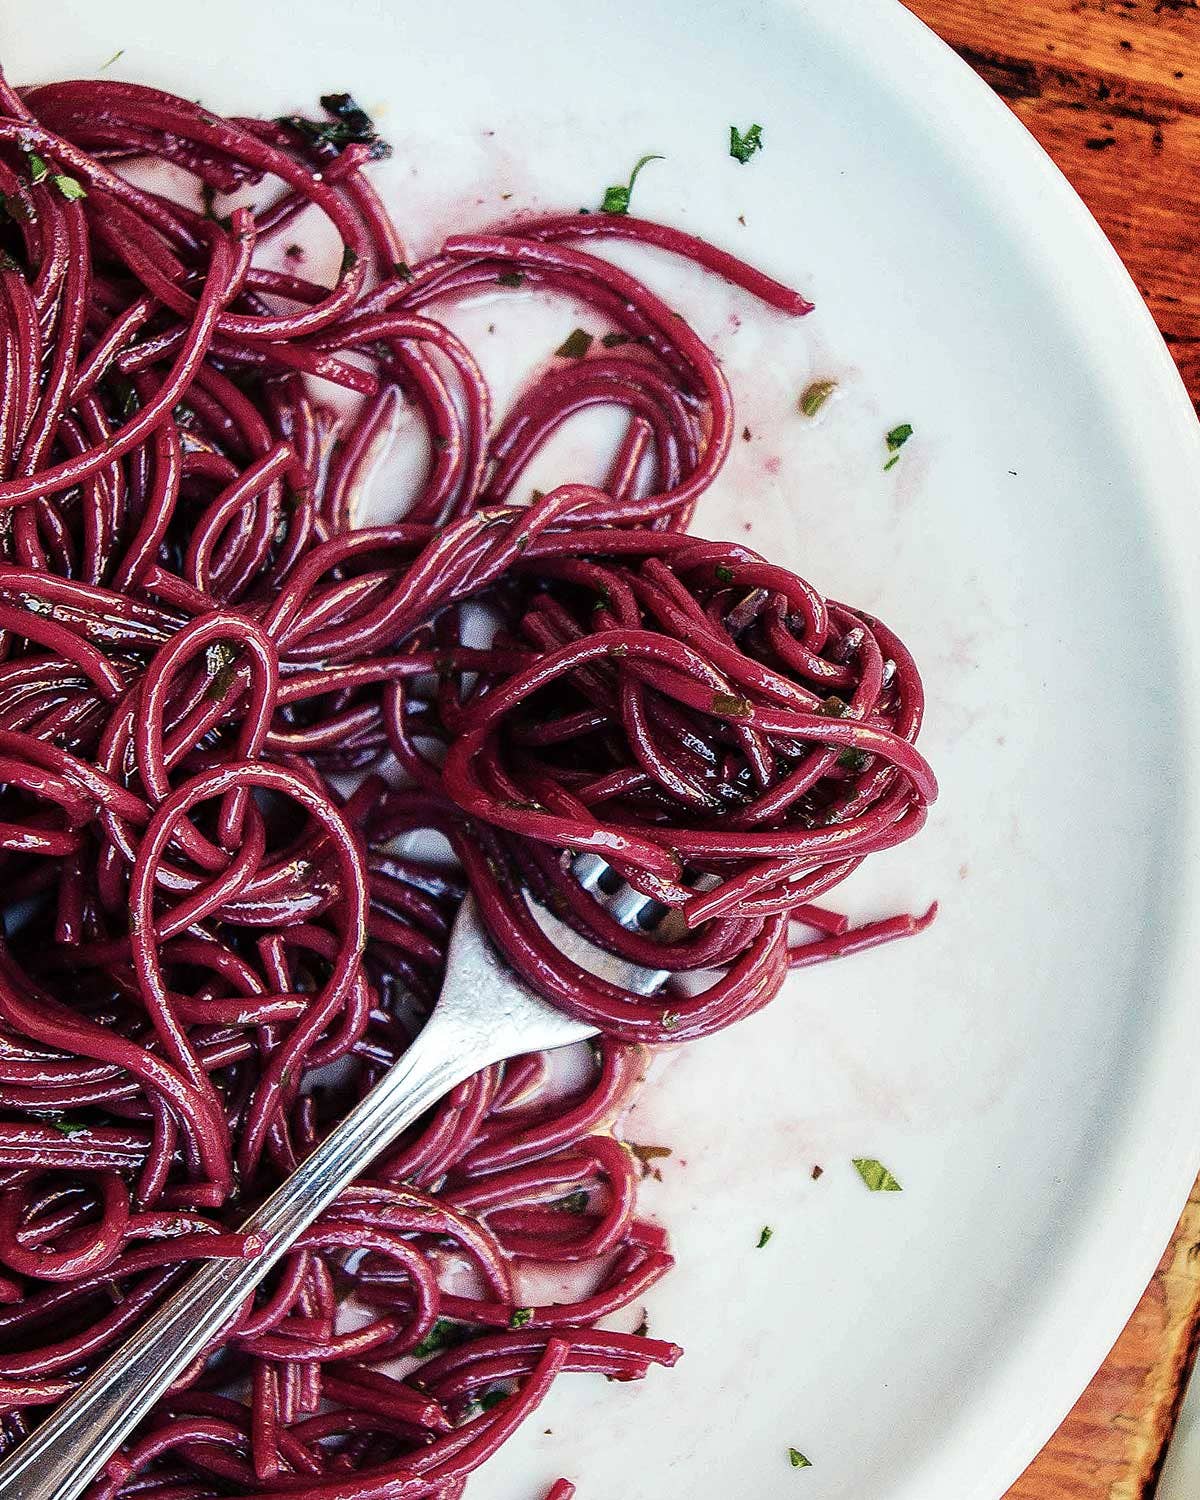 Get Your Spaghetti Drunk on Wine